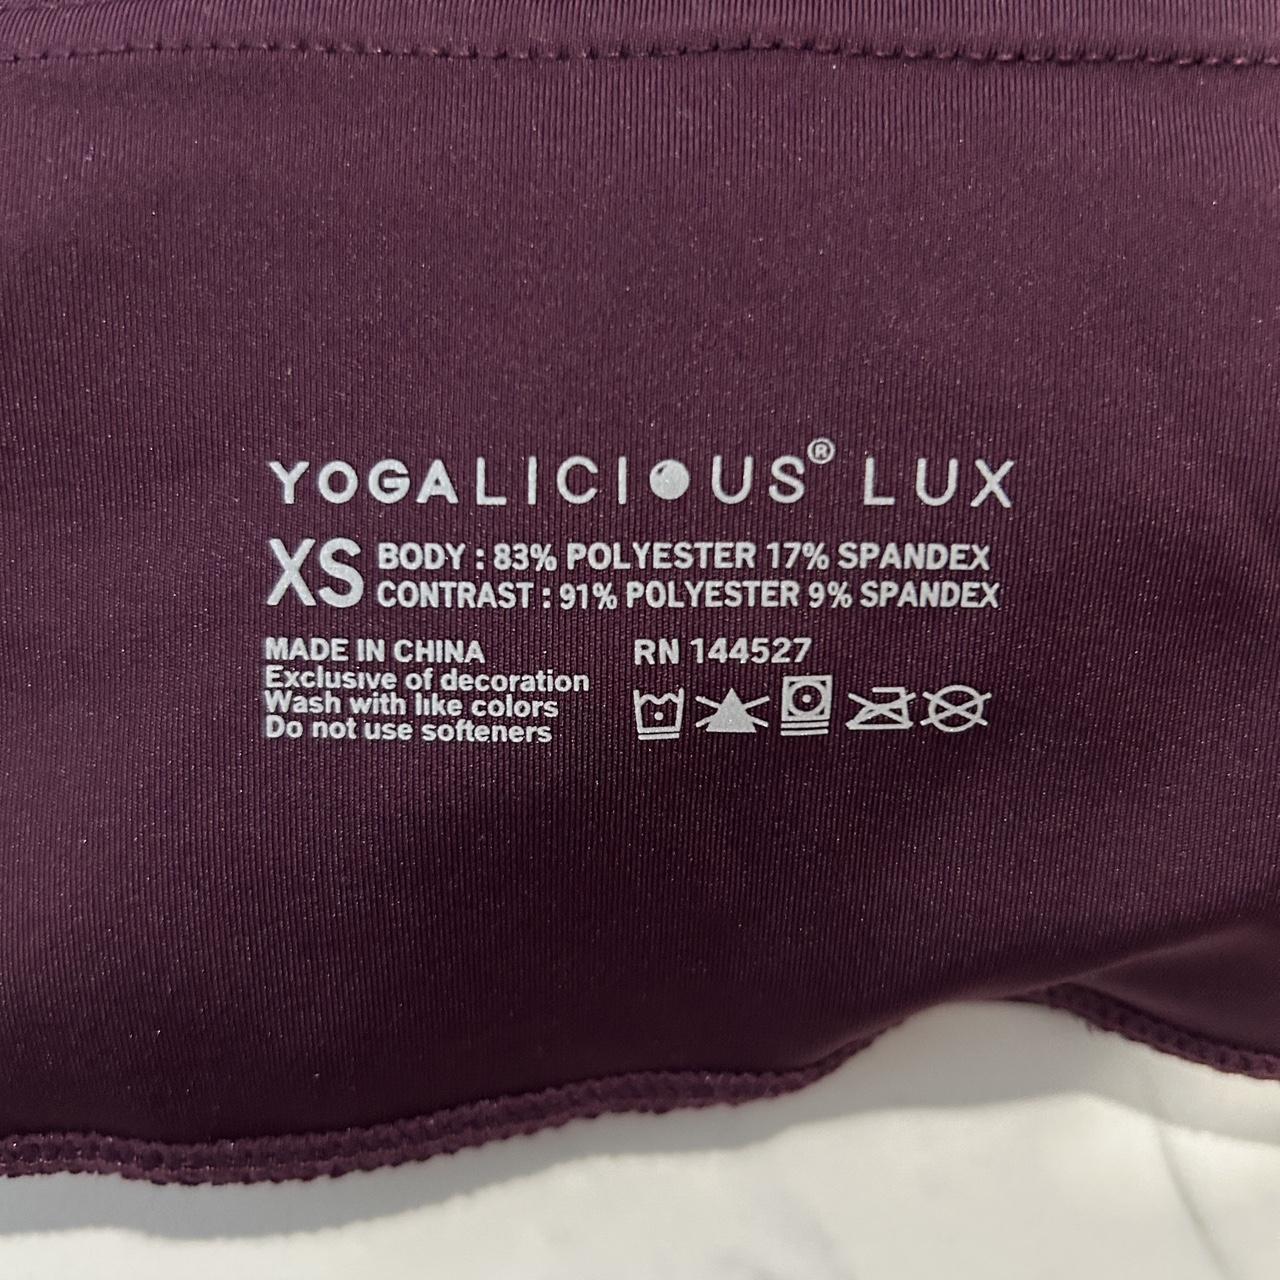 Yogalicious LUX soft, breathable fabric high rise - Depop